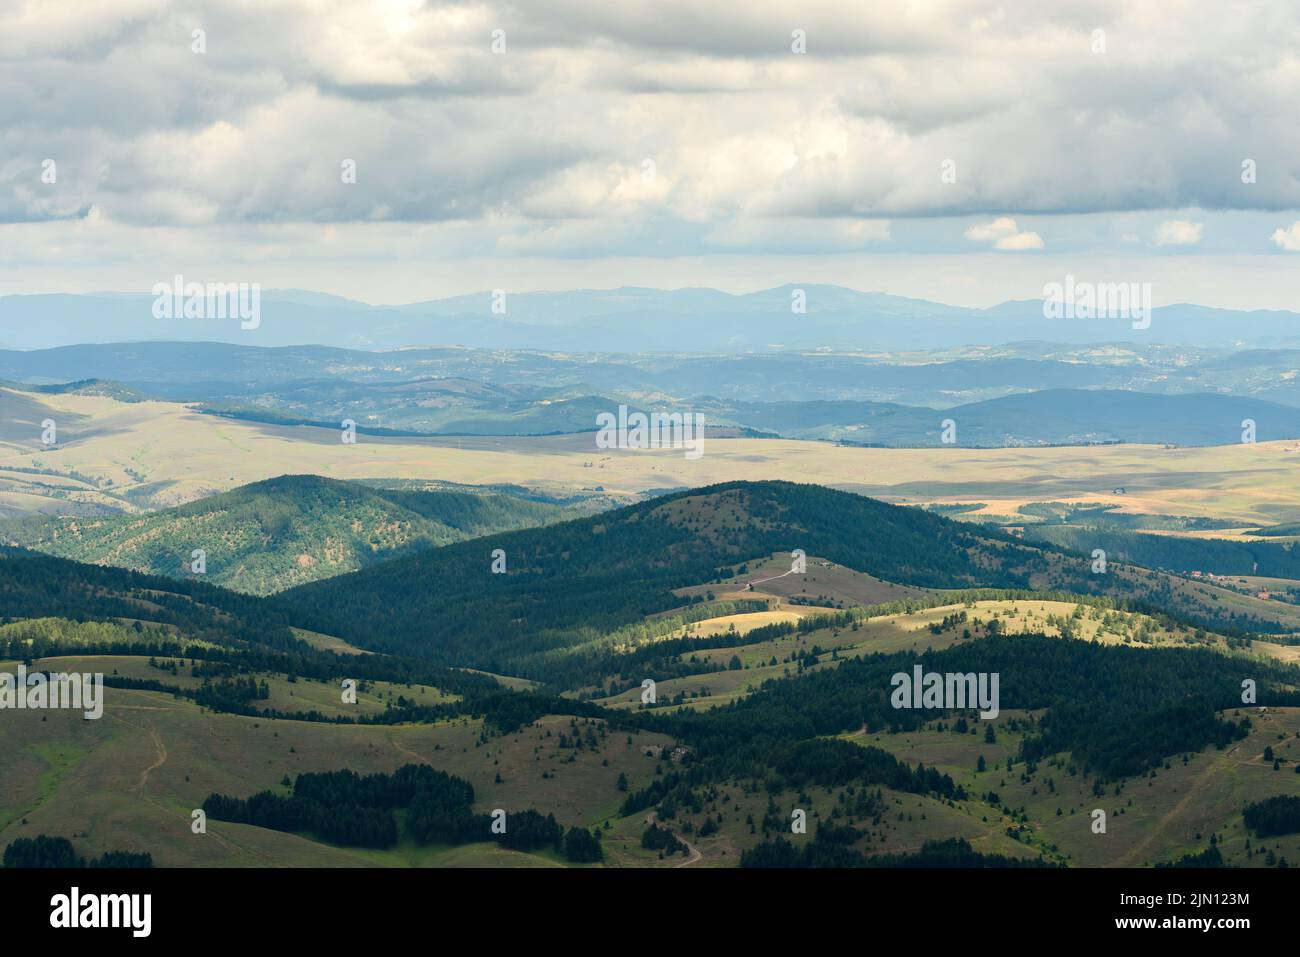 View of Zlatibor hills and valleys seen from the Tornik mountain top on sunny summer day Stock Photo